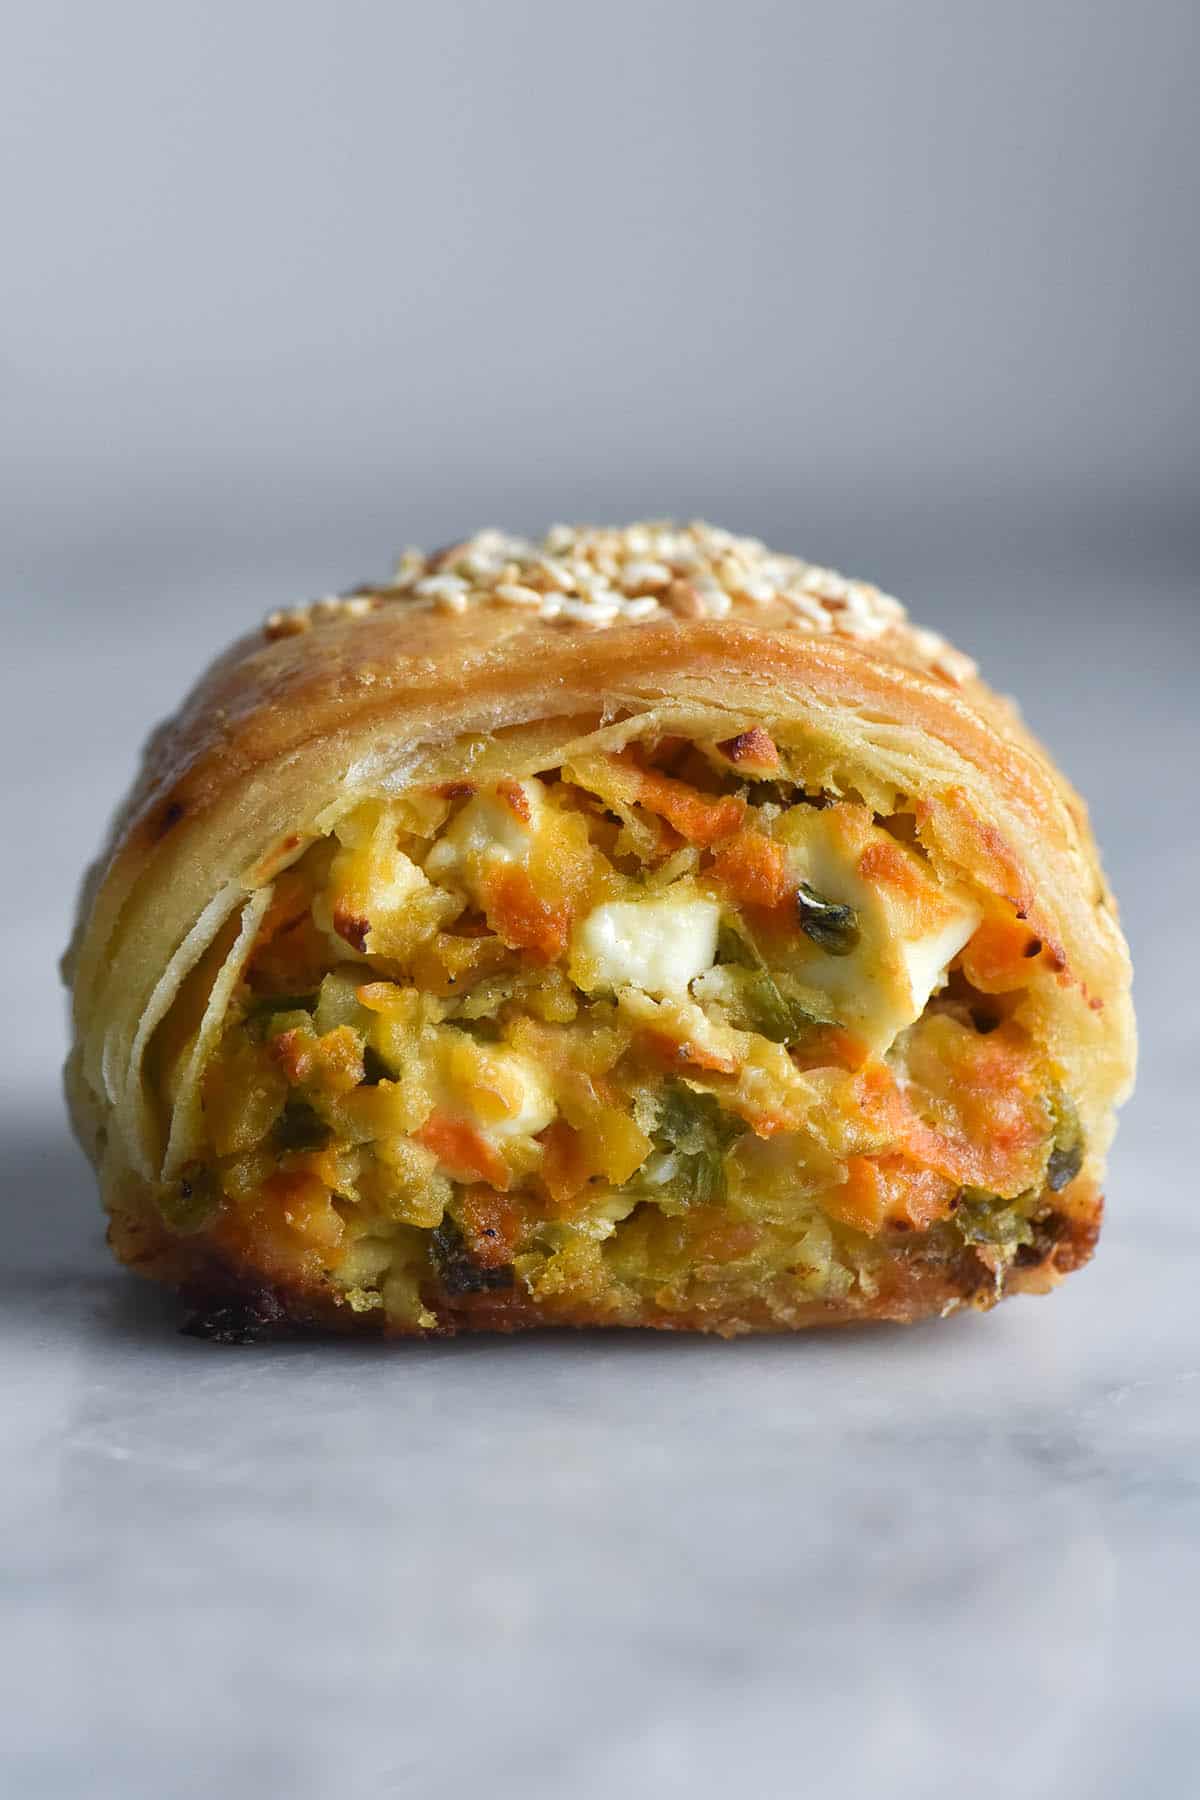 A side on close up view of a gluten free chickpea, vegetable and feta sausage roll. The roll sits atop a white marble table against a white backdrop. The side on view exposes the cooked mixed vegetable innards with chunks of feta peeking through. On top, the pastry is flaky and layered, dotted with some toasted sesame seeds which are visible